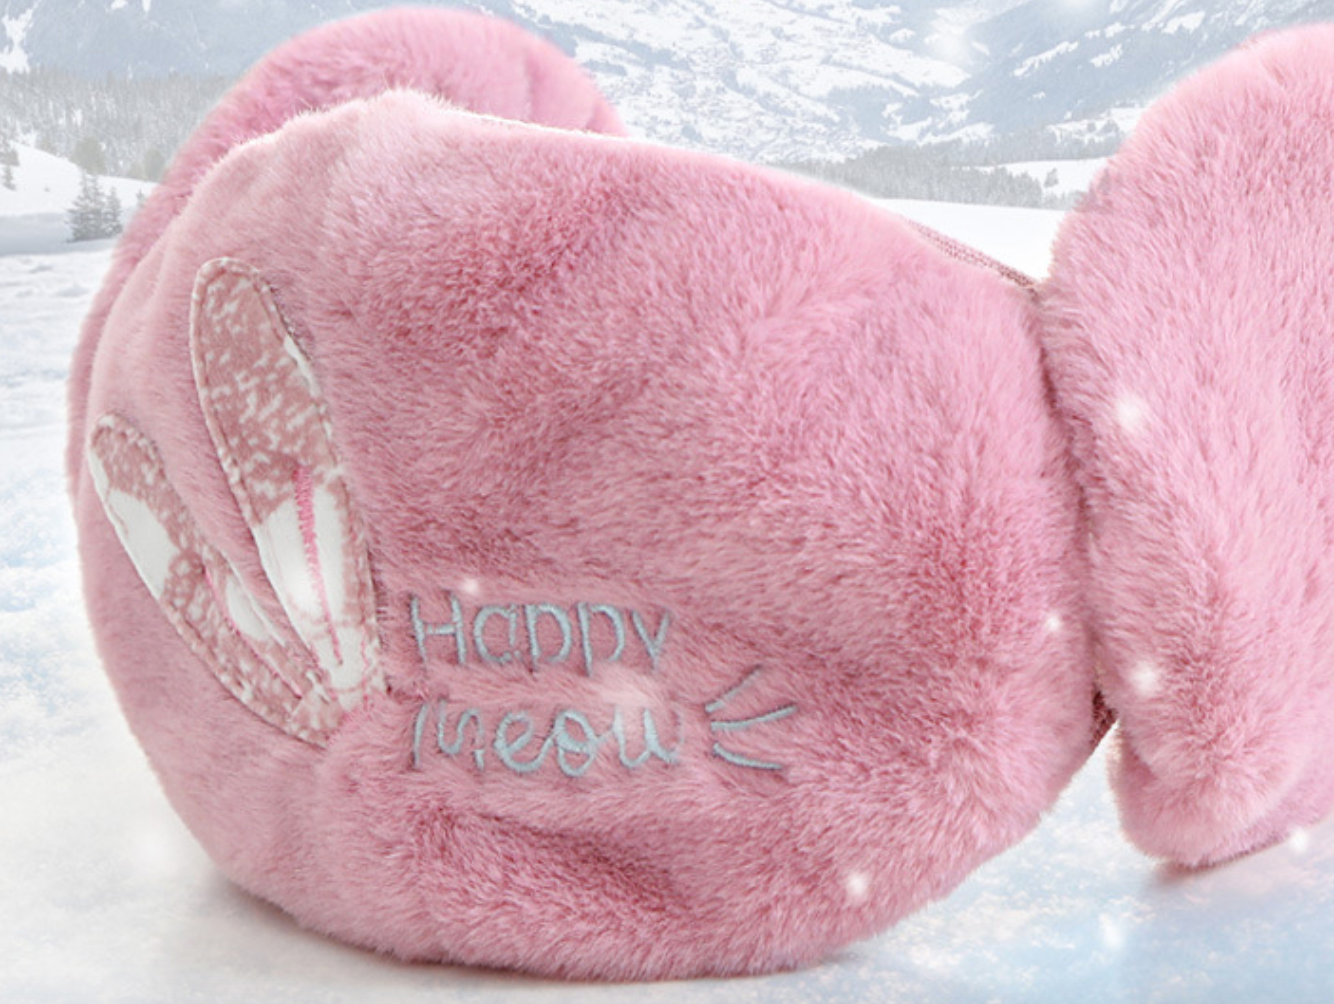 Masque protecteur Hello Kitty Chat-Hiver